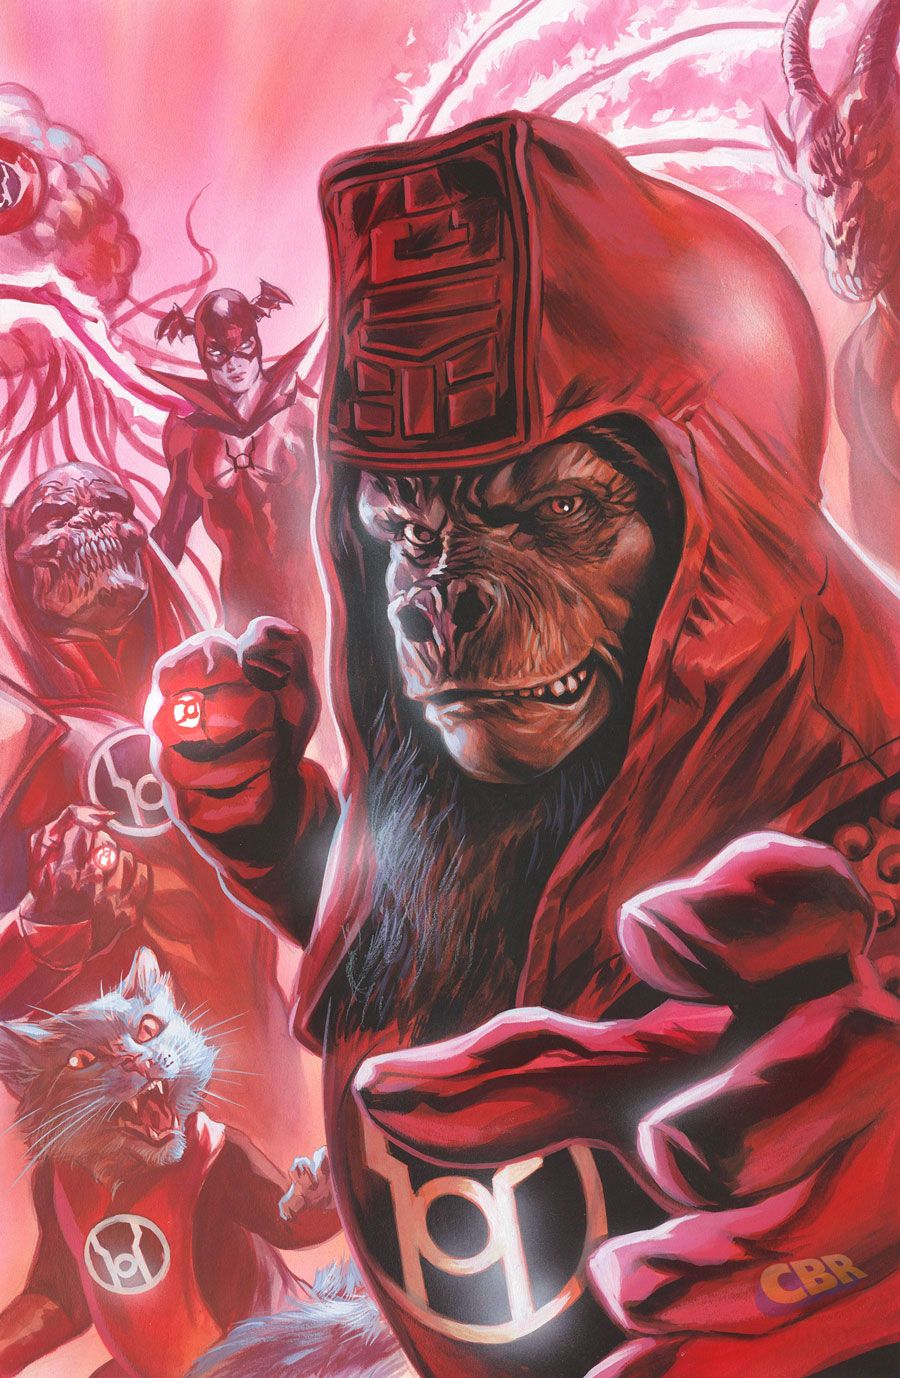 Planet of the Apes/Green Lantern #3 spectrum variant